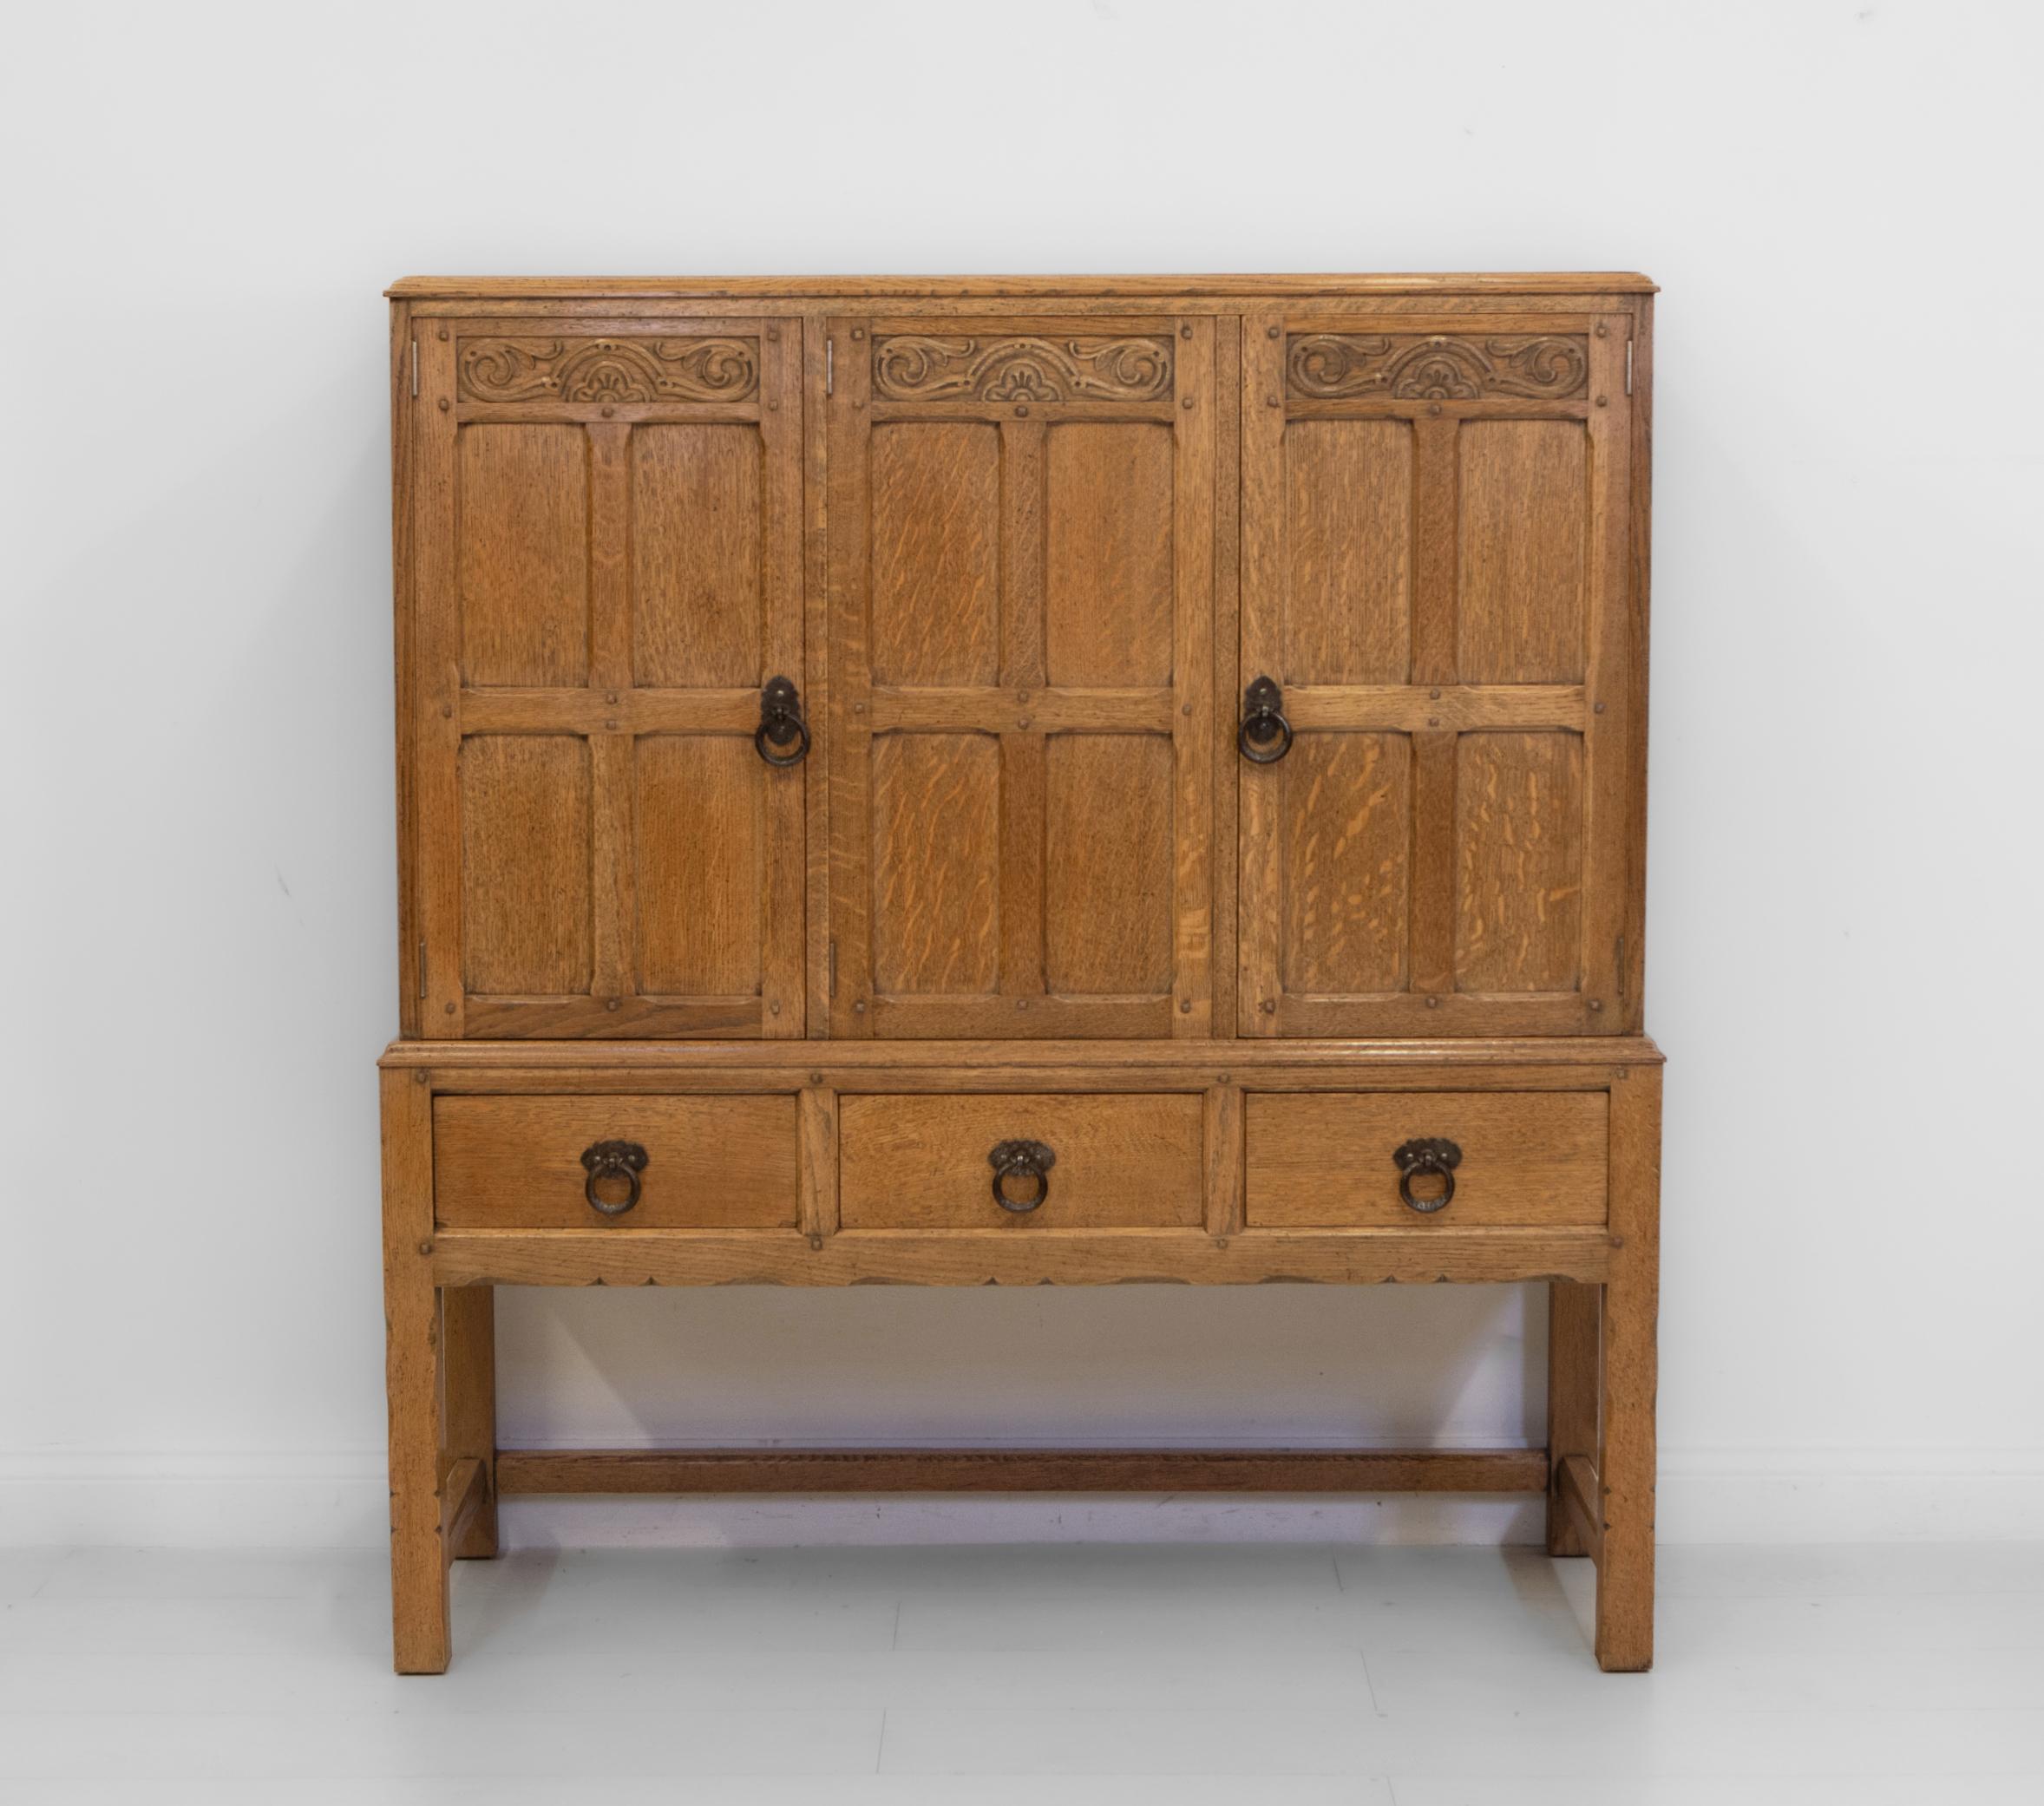 Waring & Gillow Oak Cotswold School Manner Arts And Crafts Cabinet Circa 1920 9